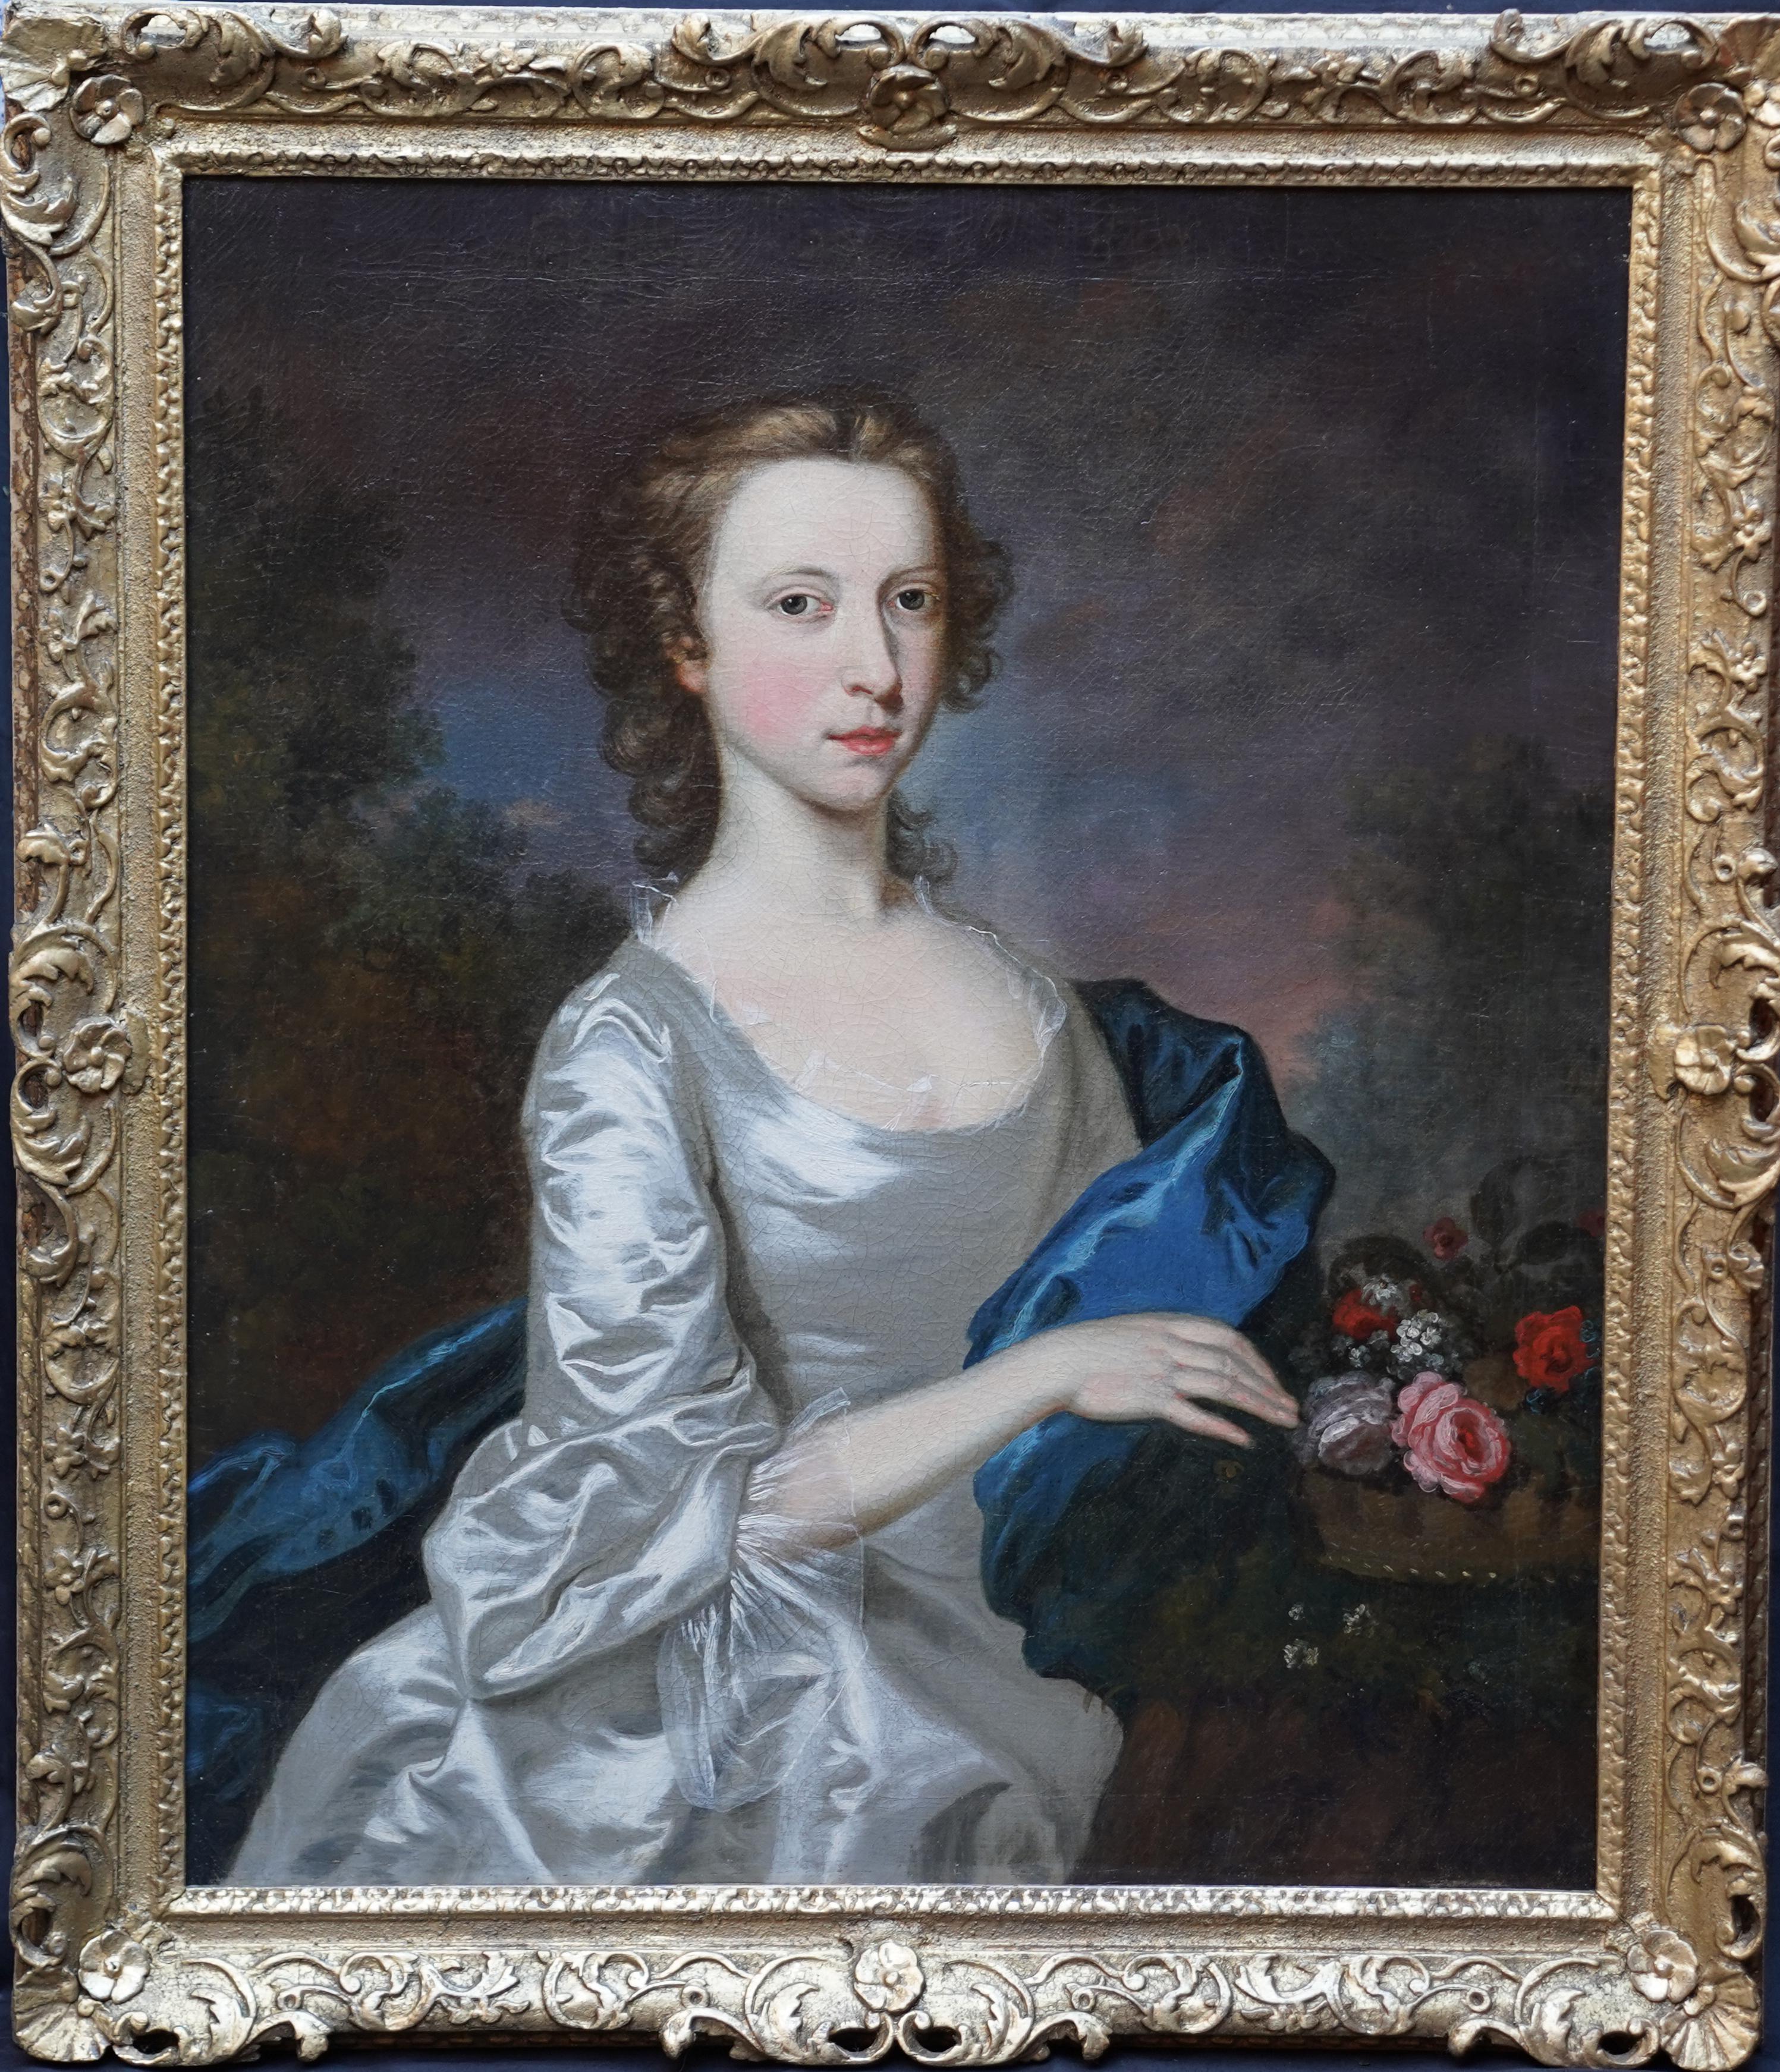 Portrait of a Lady in Silver Dress - Scottish 18thC art Old Master oil painting 9